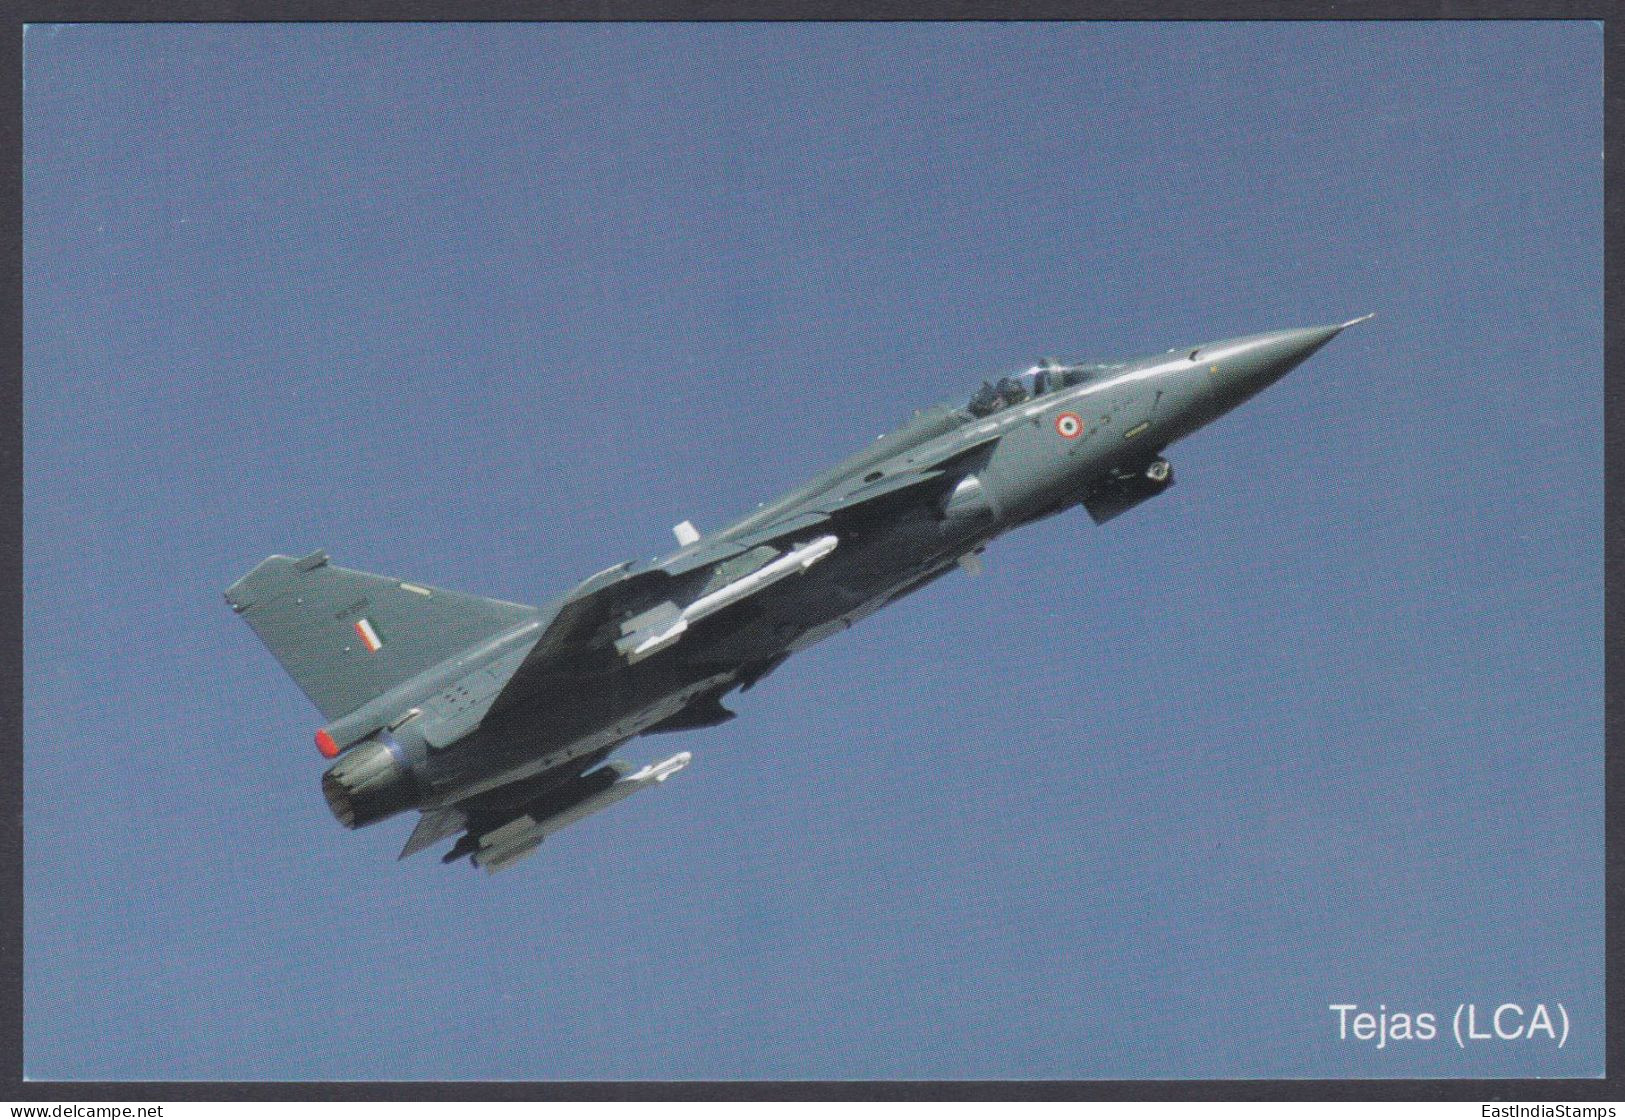 Inde India 2007 Mint Postcard Bangalore Air Show Tejas, LCA, Indian Air Force Fighter Jet, Aircraft, Airplane, Aeroplane - Inde